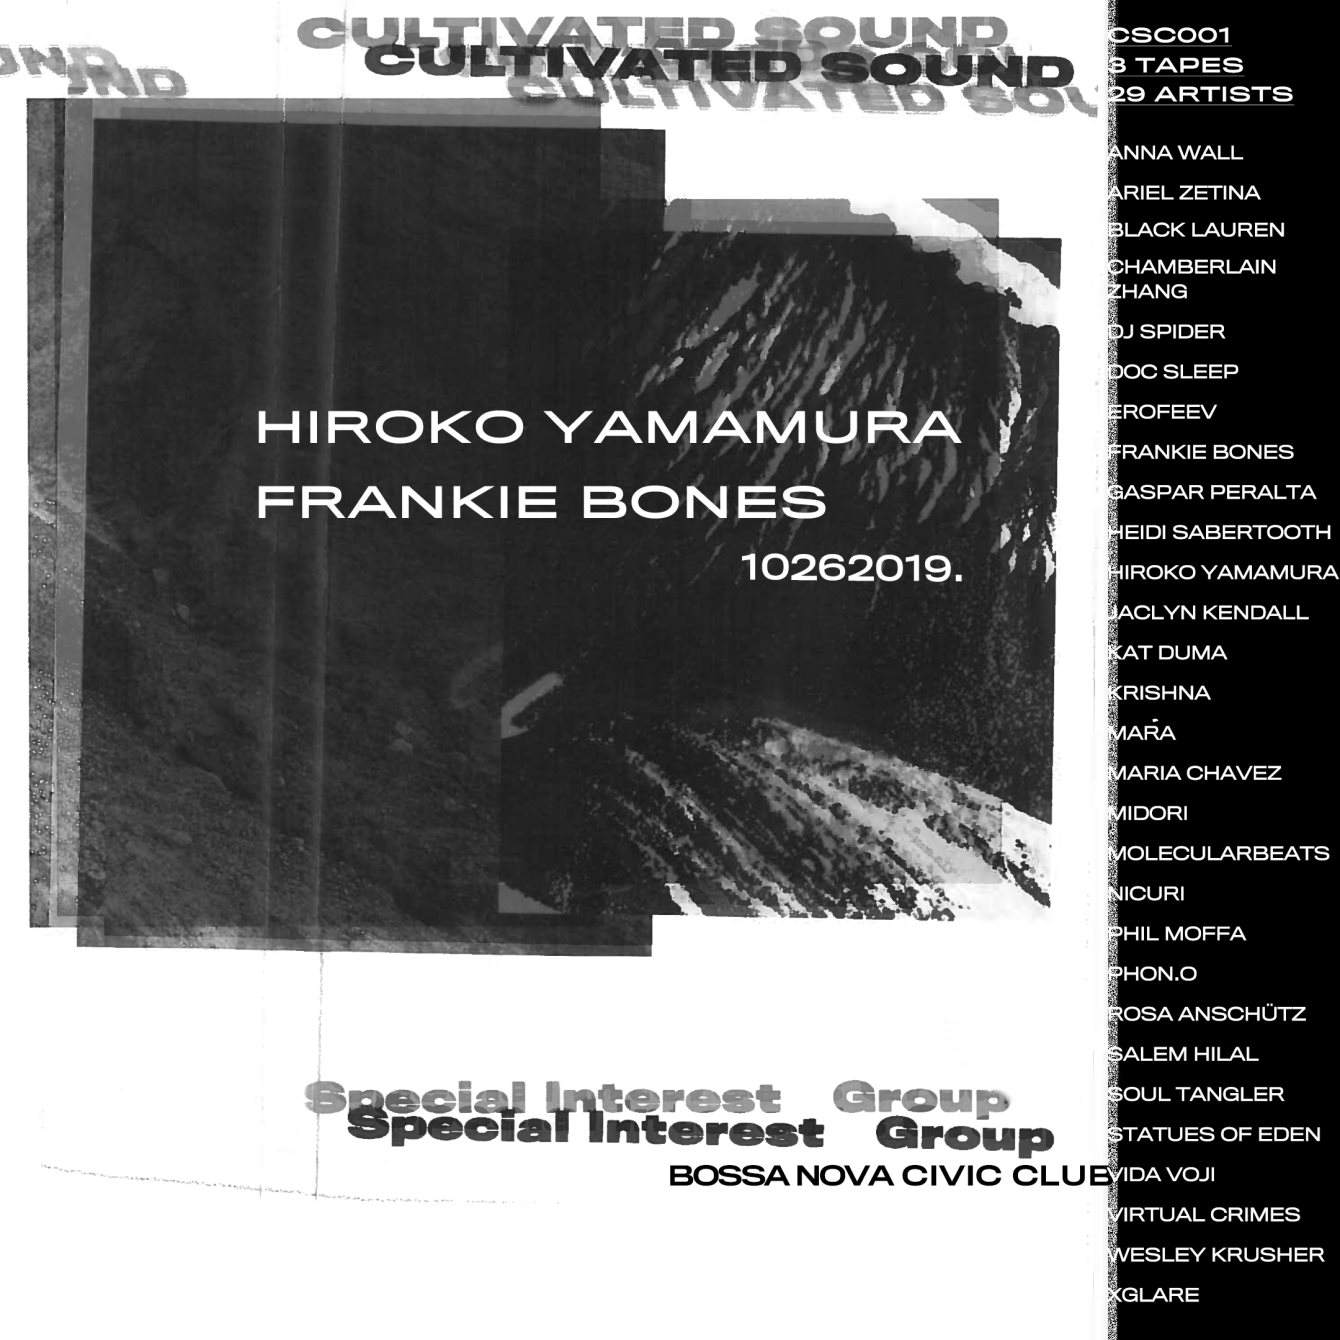 Cultivated Sound Compilation Release Party with Hiroko Yamamura & Frankie Bones - Página frontal